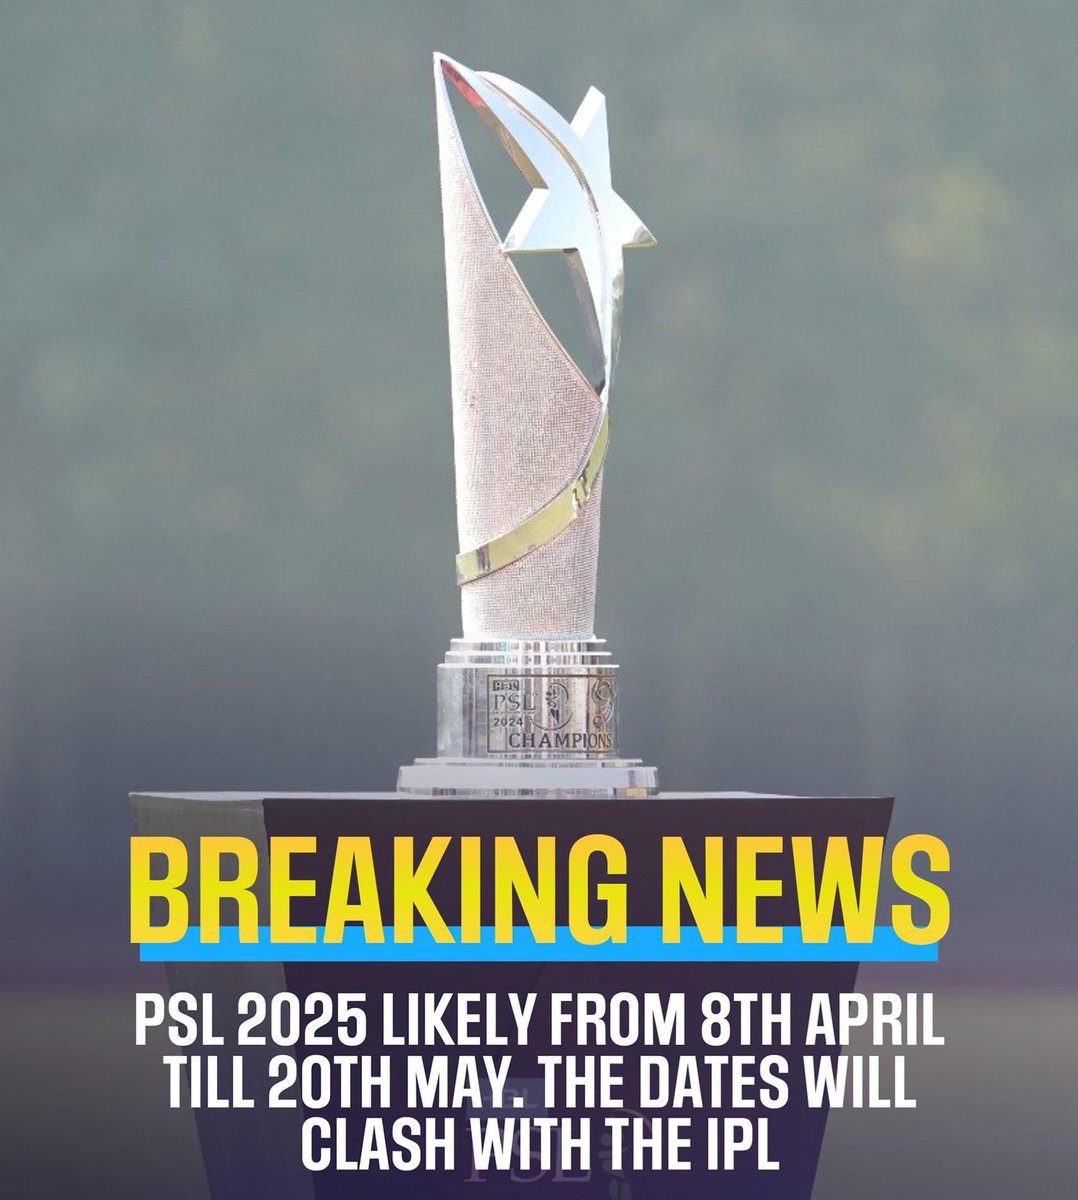 The tenth edition of PSL is expected to be scheduled from 8 April to 20 May. The window of PSL10 is changed due to Champions Trophy 2025 scheduled in February.
#CT25
#PSL10 
#ipl2024 #cricket